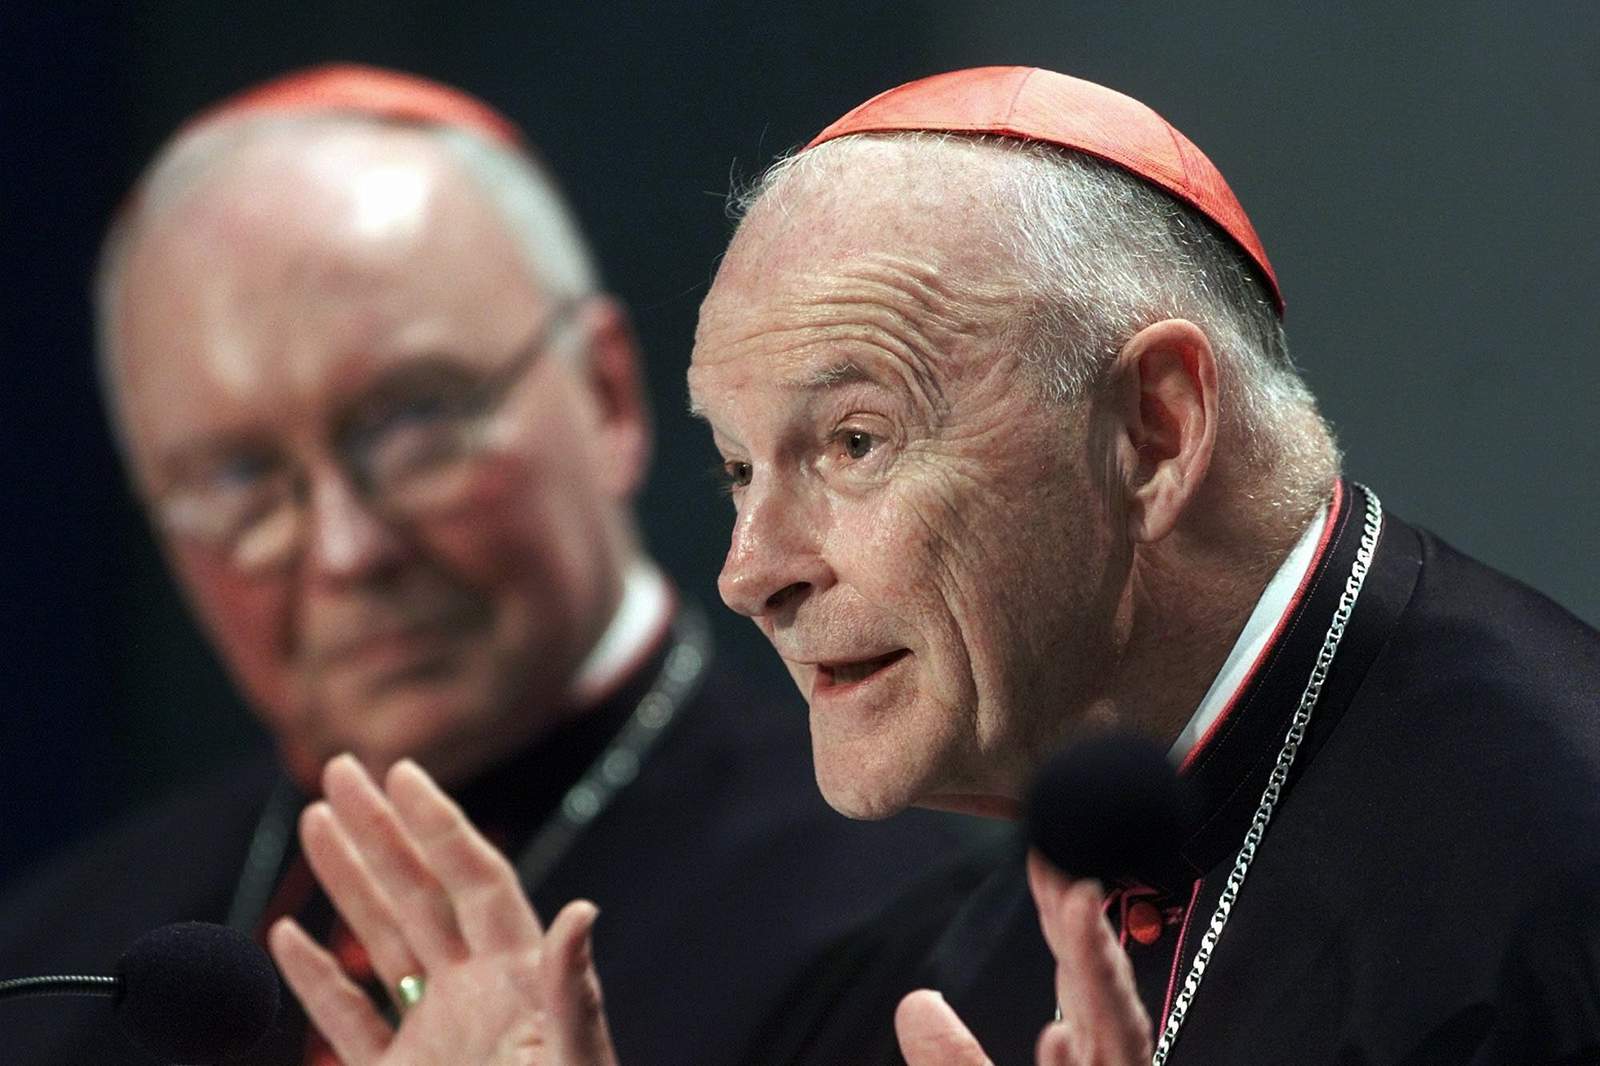 Vatican faults others for McCarrick's rise, spares Francis